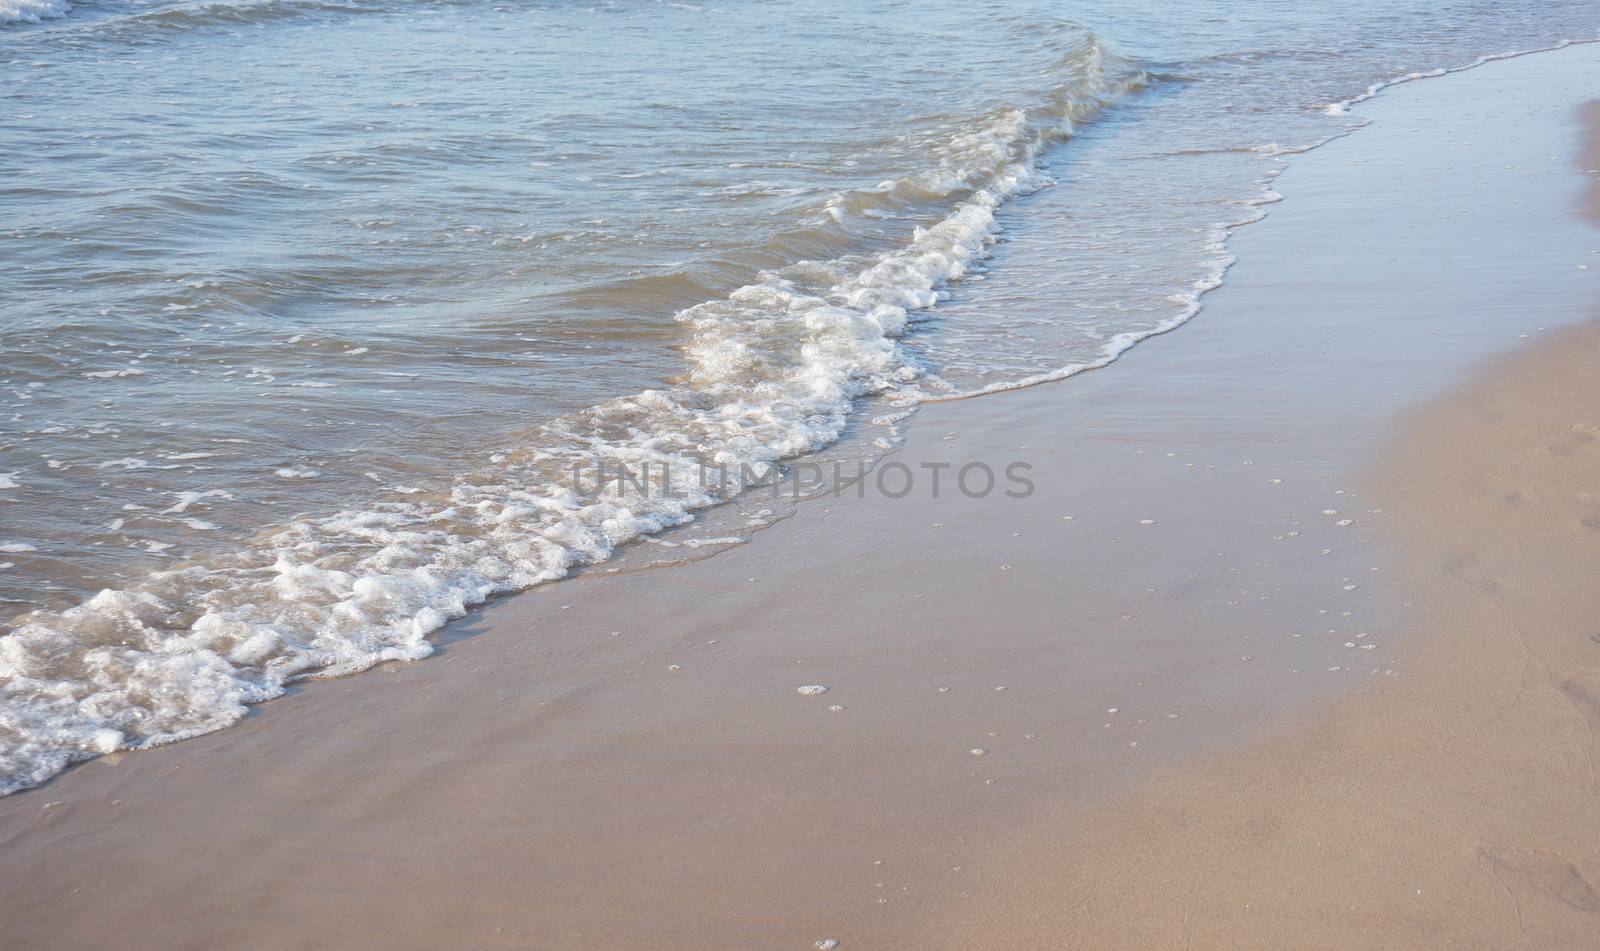 Sand and water at a beach